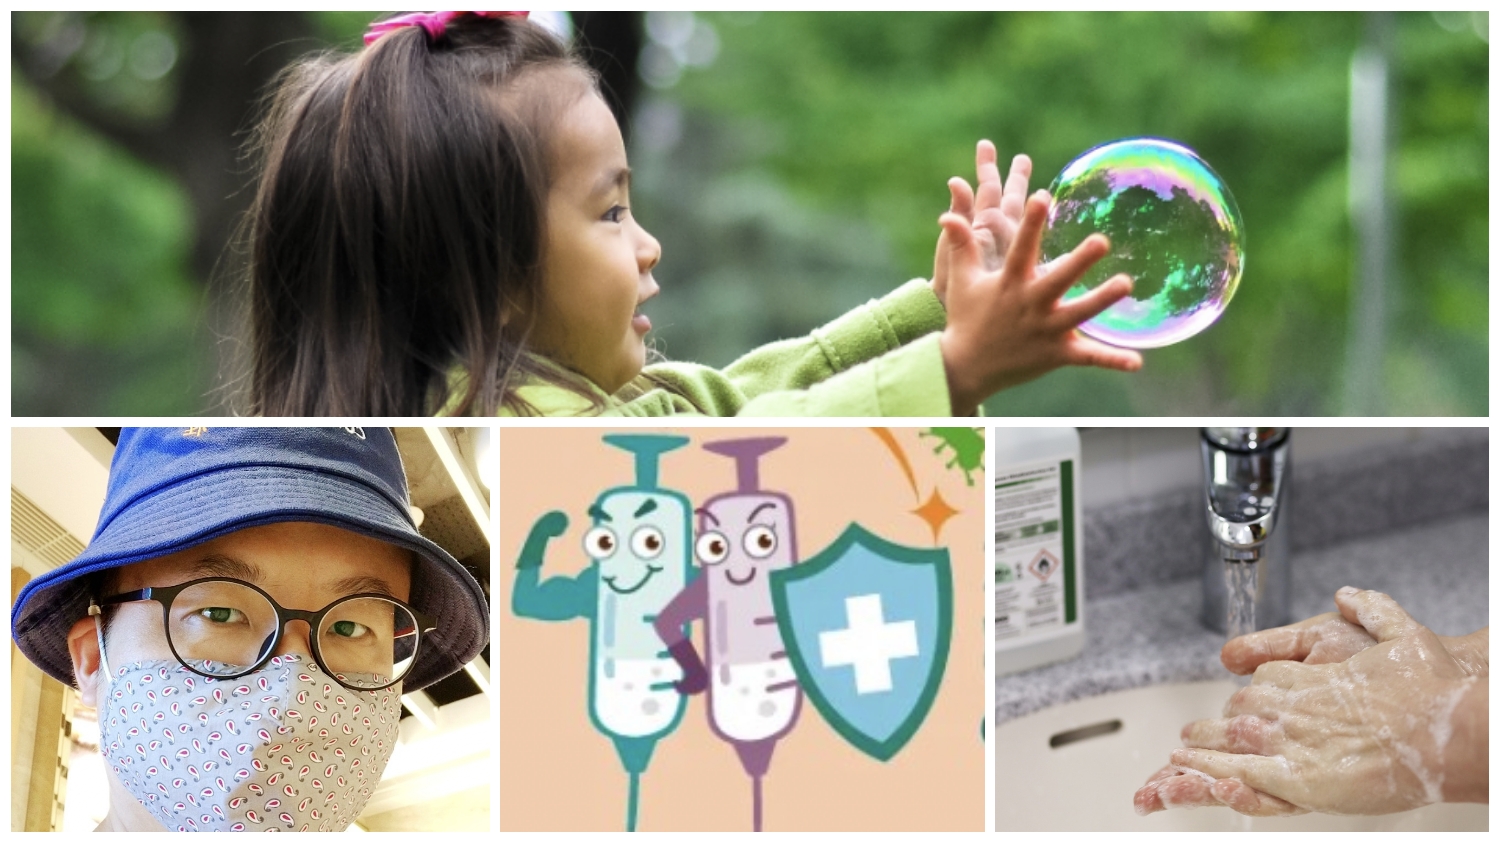 Protect the toddling travel bubble by wearing mask, washing hands and getting vaccine